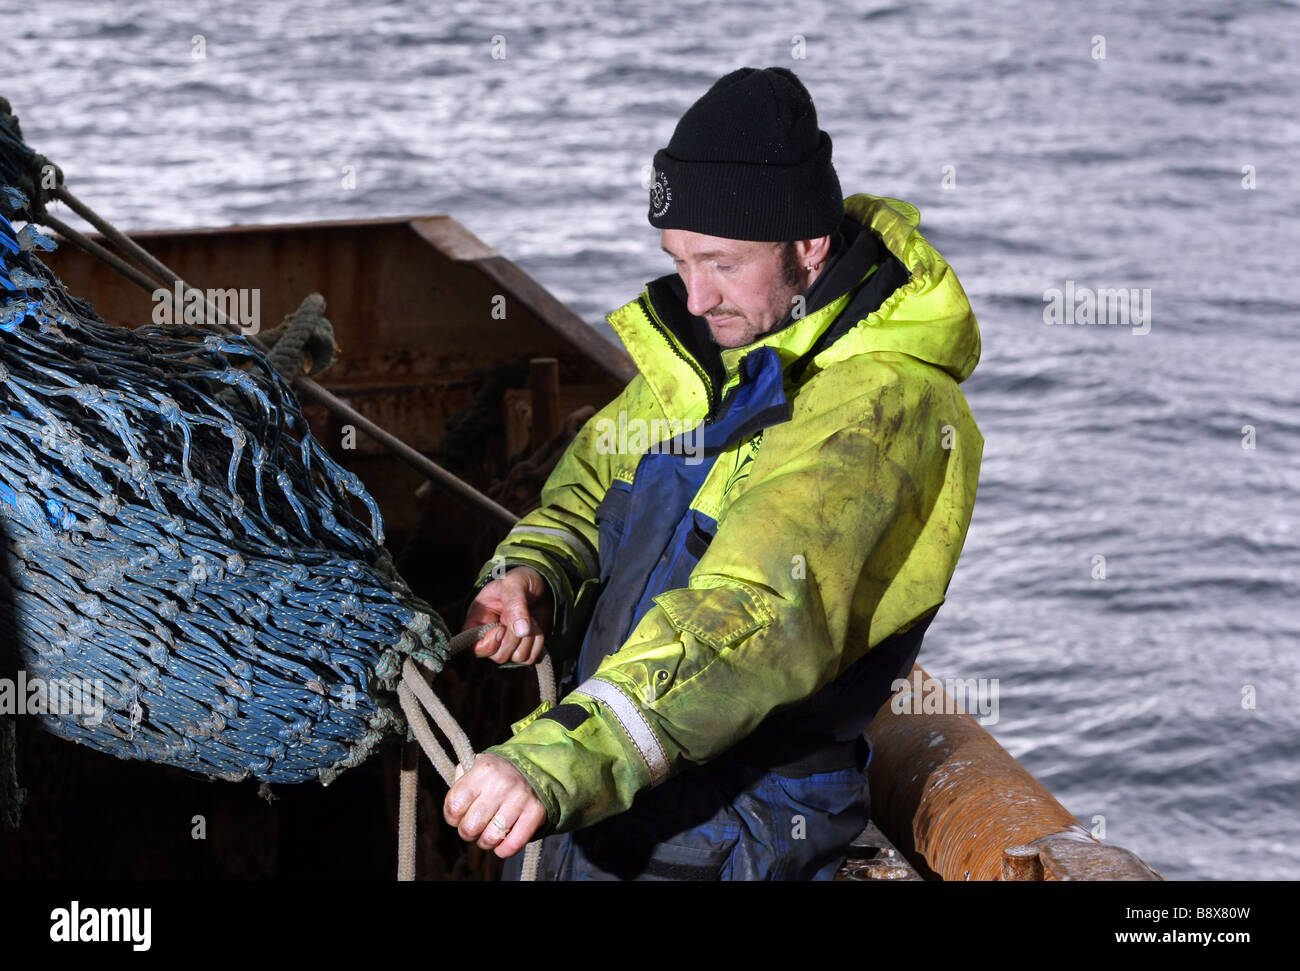 North sea fisherman based in Peterhead, Scotland, working on the nets of a fishing boat Stock Photo